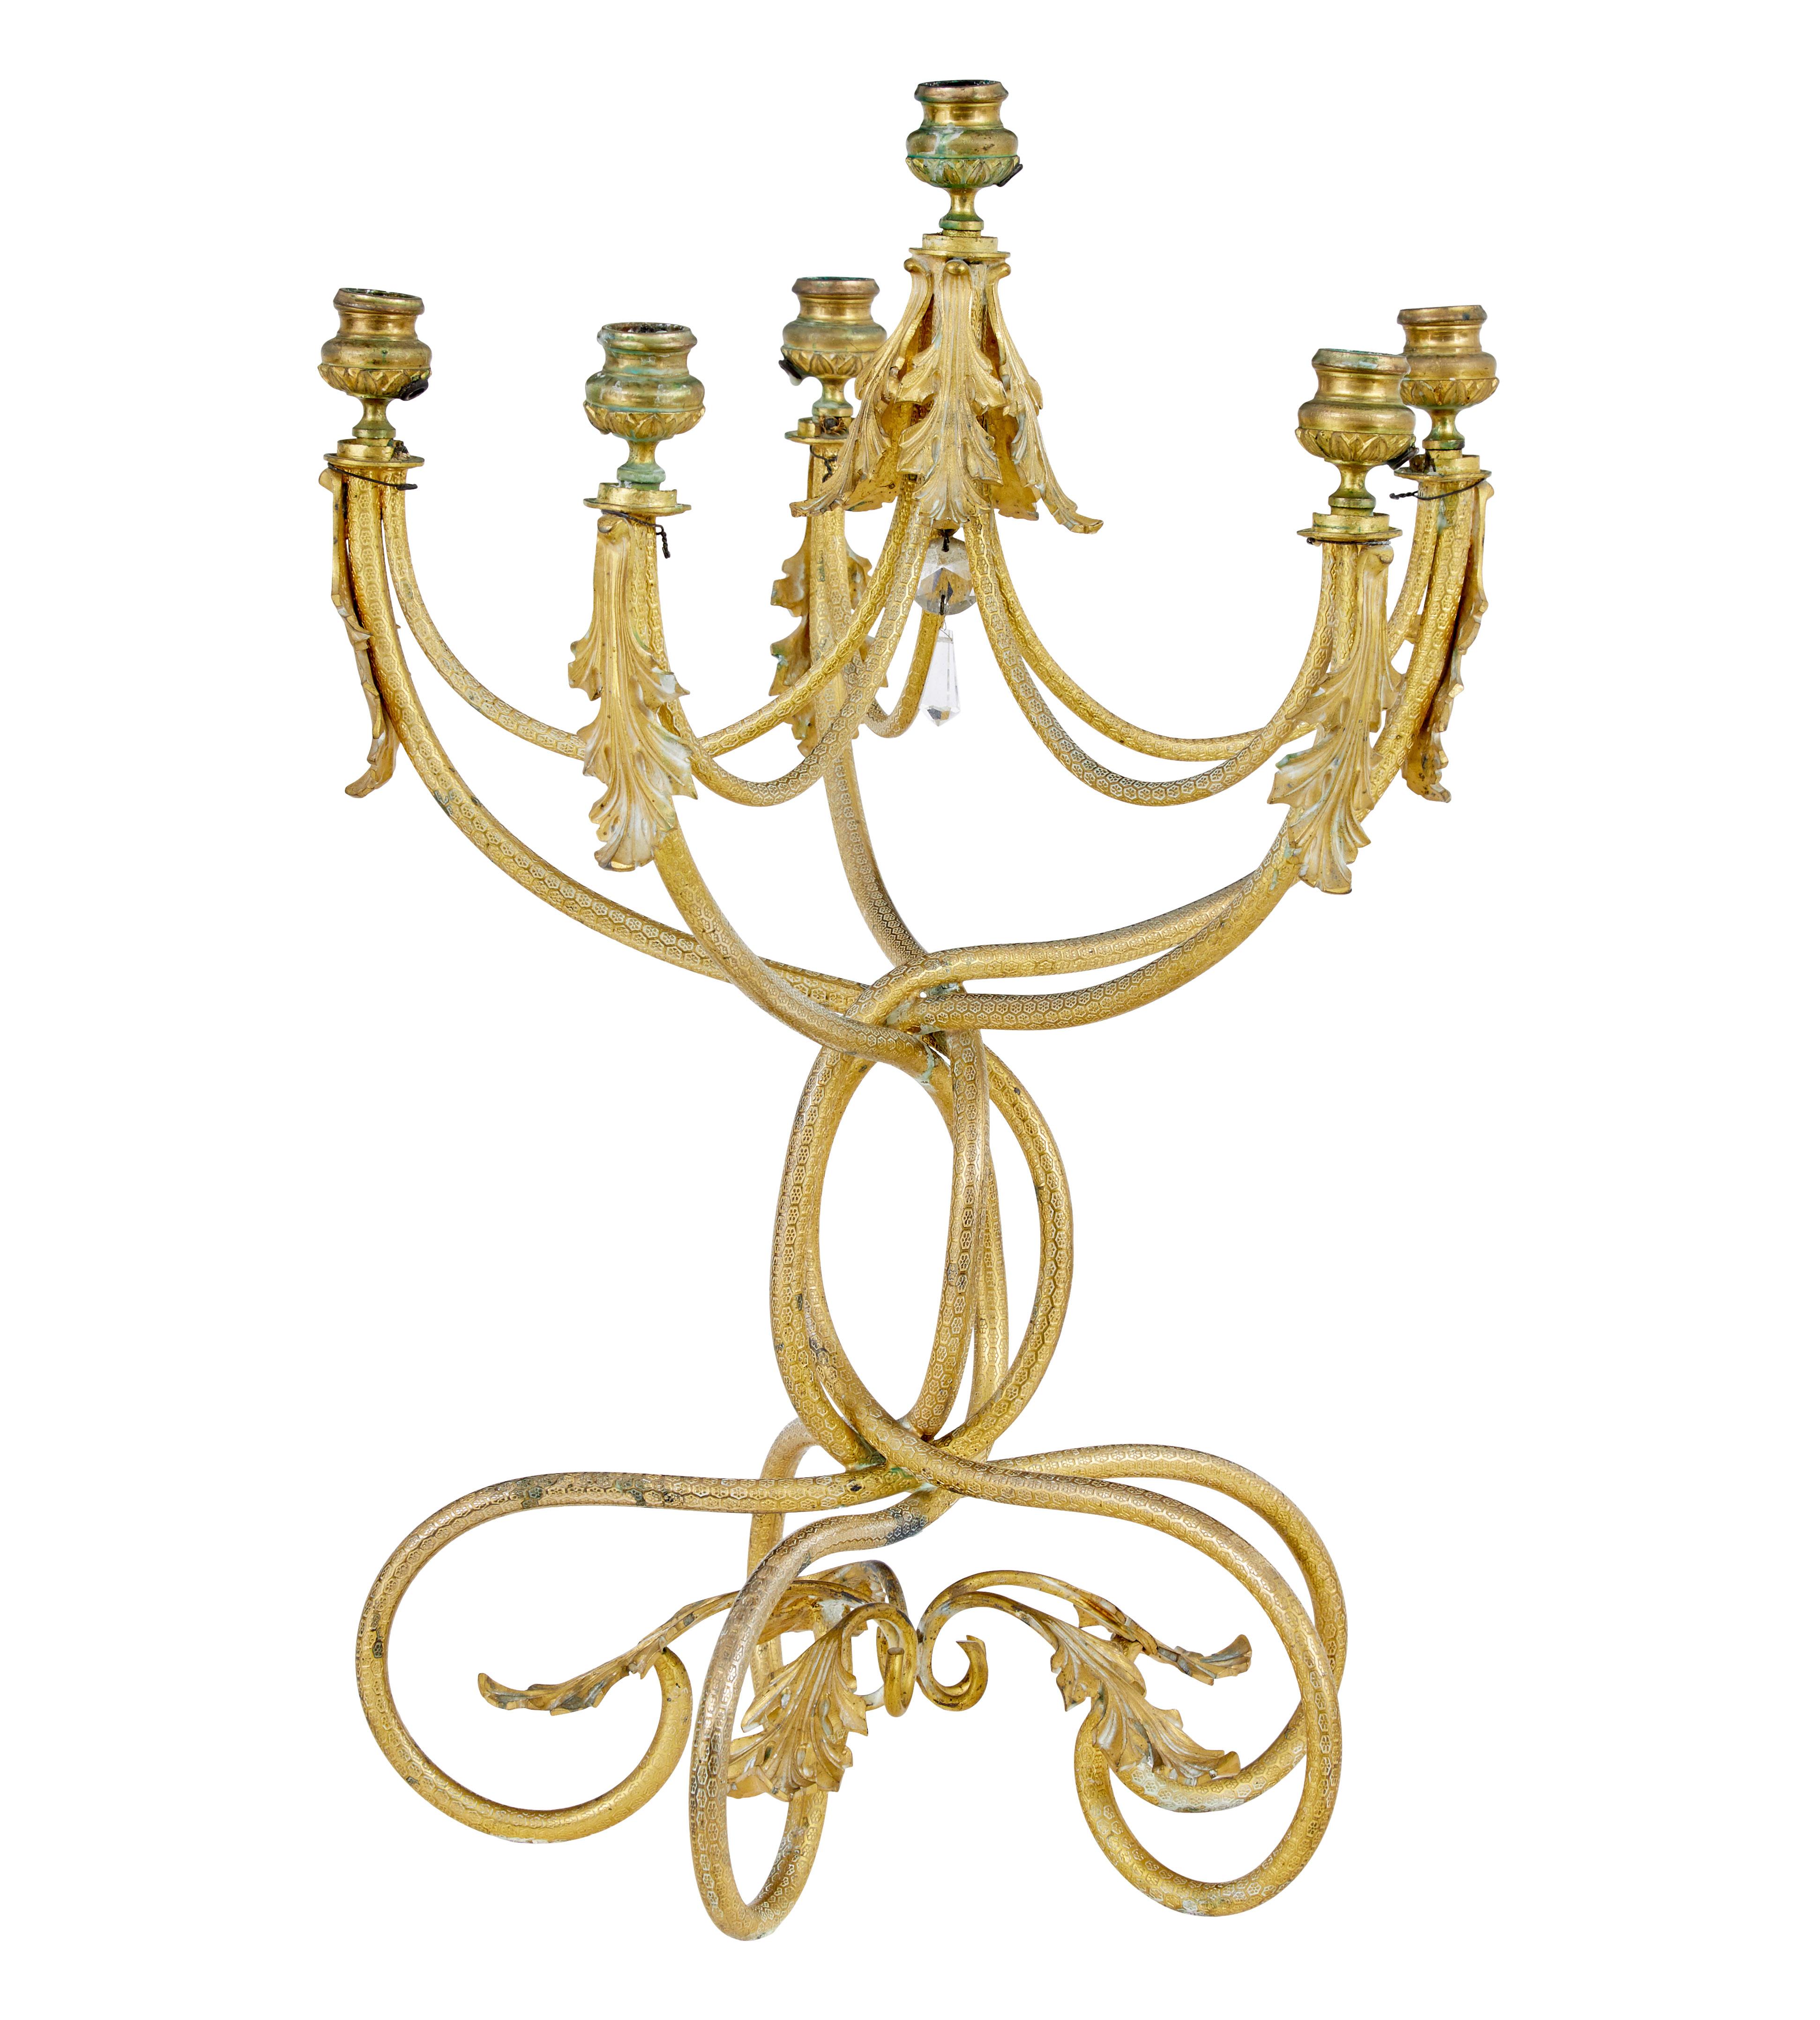 19th century French ormolu six-candle candelabra circa 1880.

Fine quality chiselled ormolu craftsmanship on this piece.  Stamped with a hexagonal pattern all over.  Six arms, five on the lower tier and a further arm in the centre in an elevated